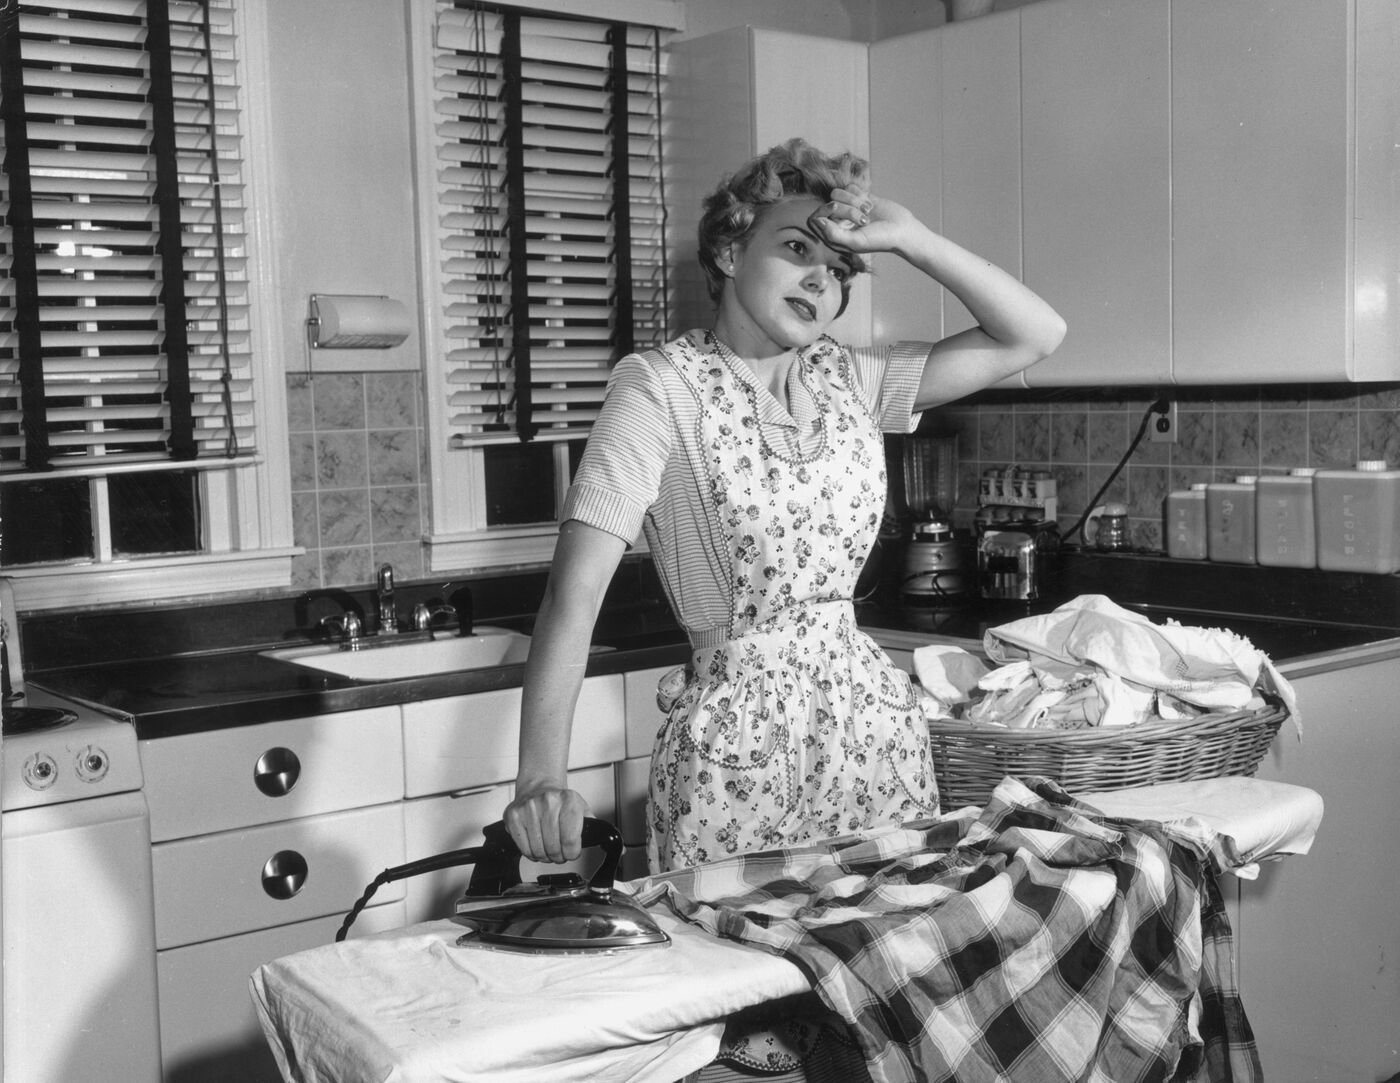 Women Shouldn’t Do Any More Housework This Year - Bloomberg